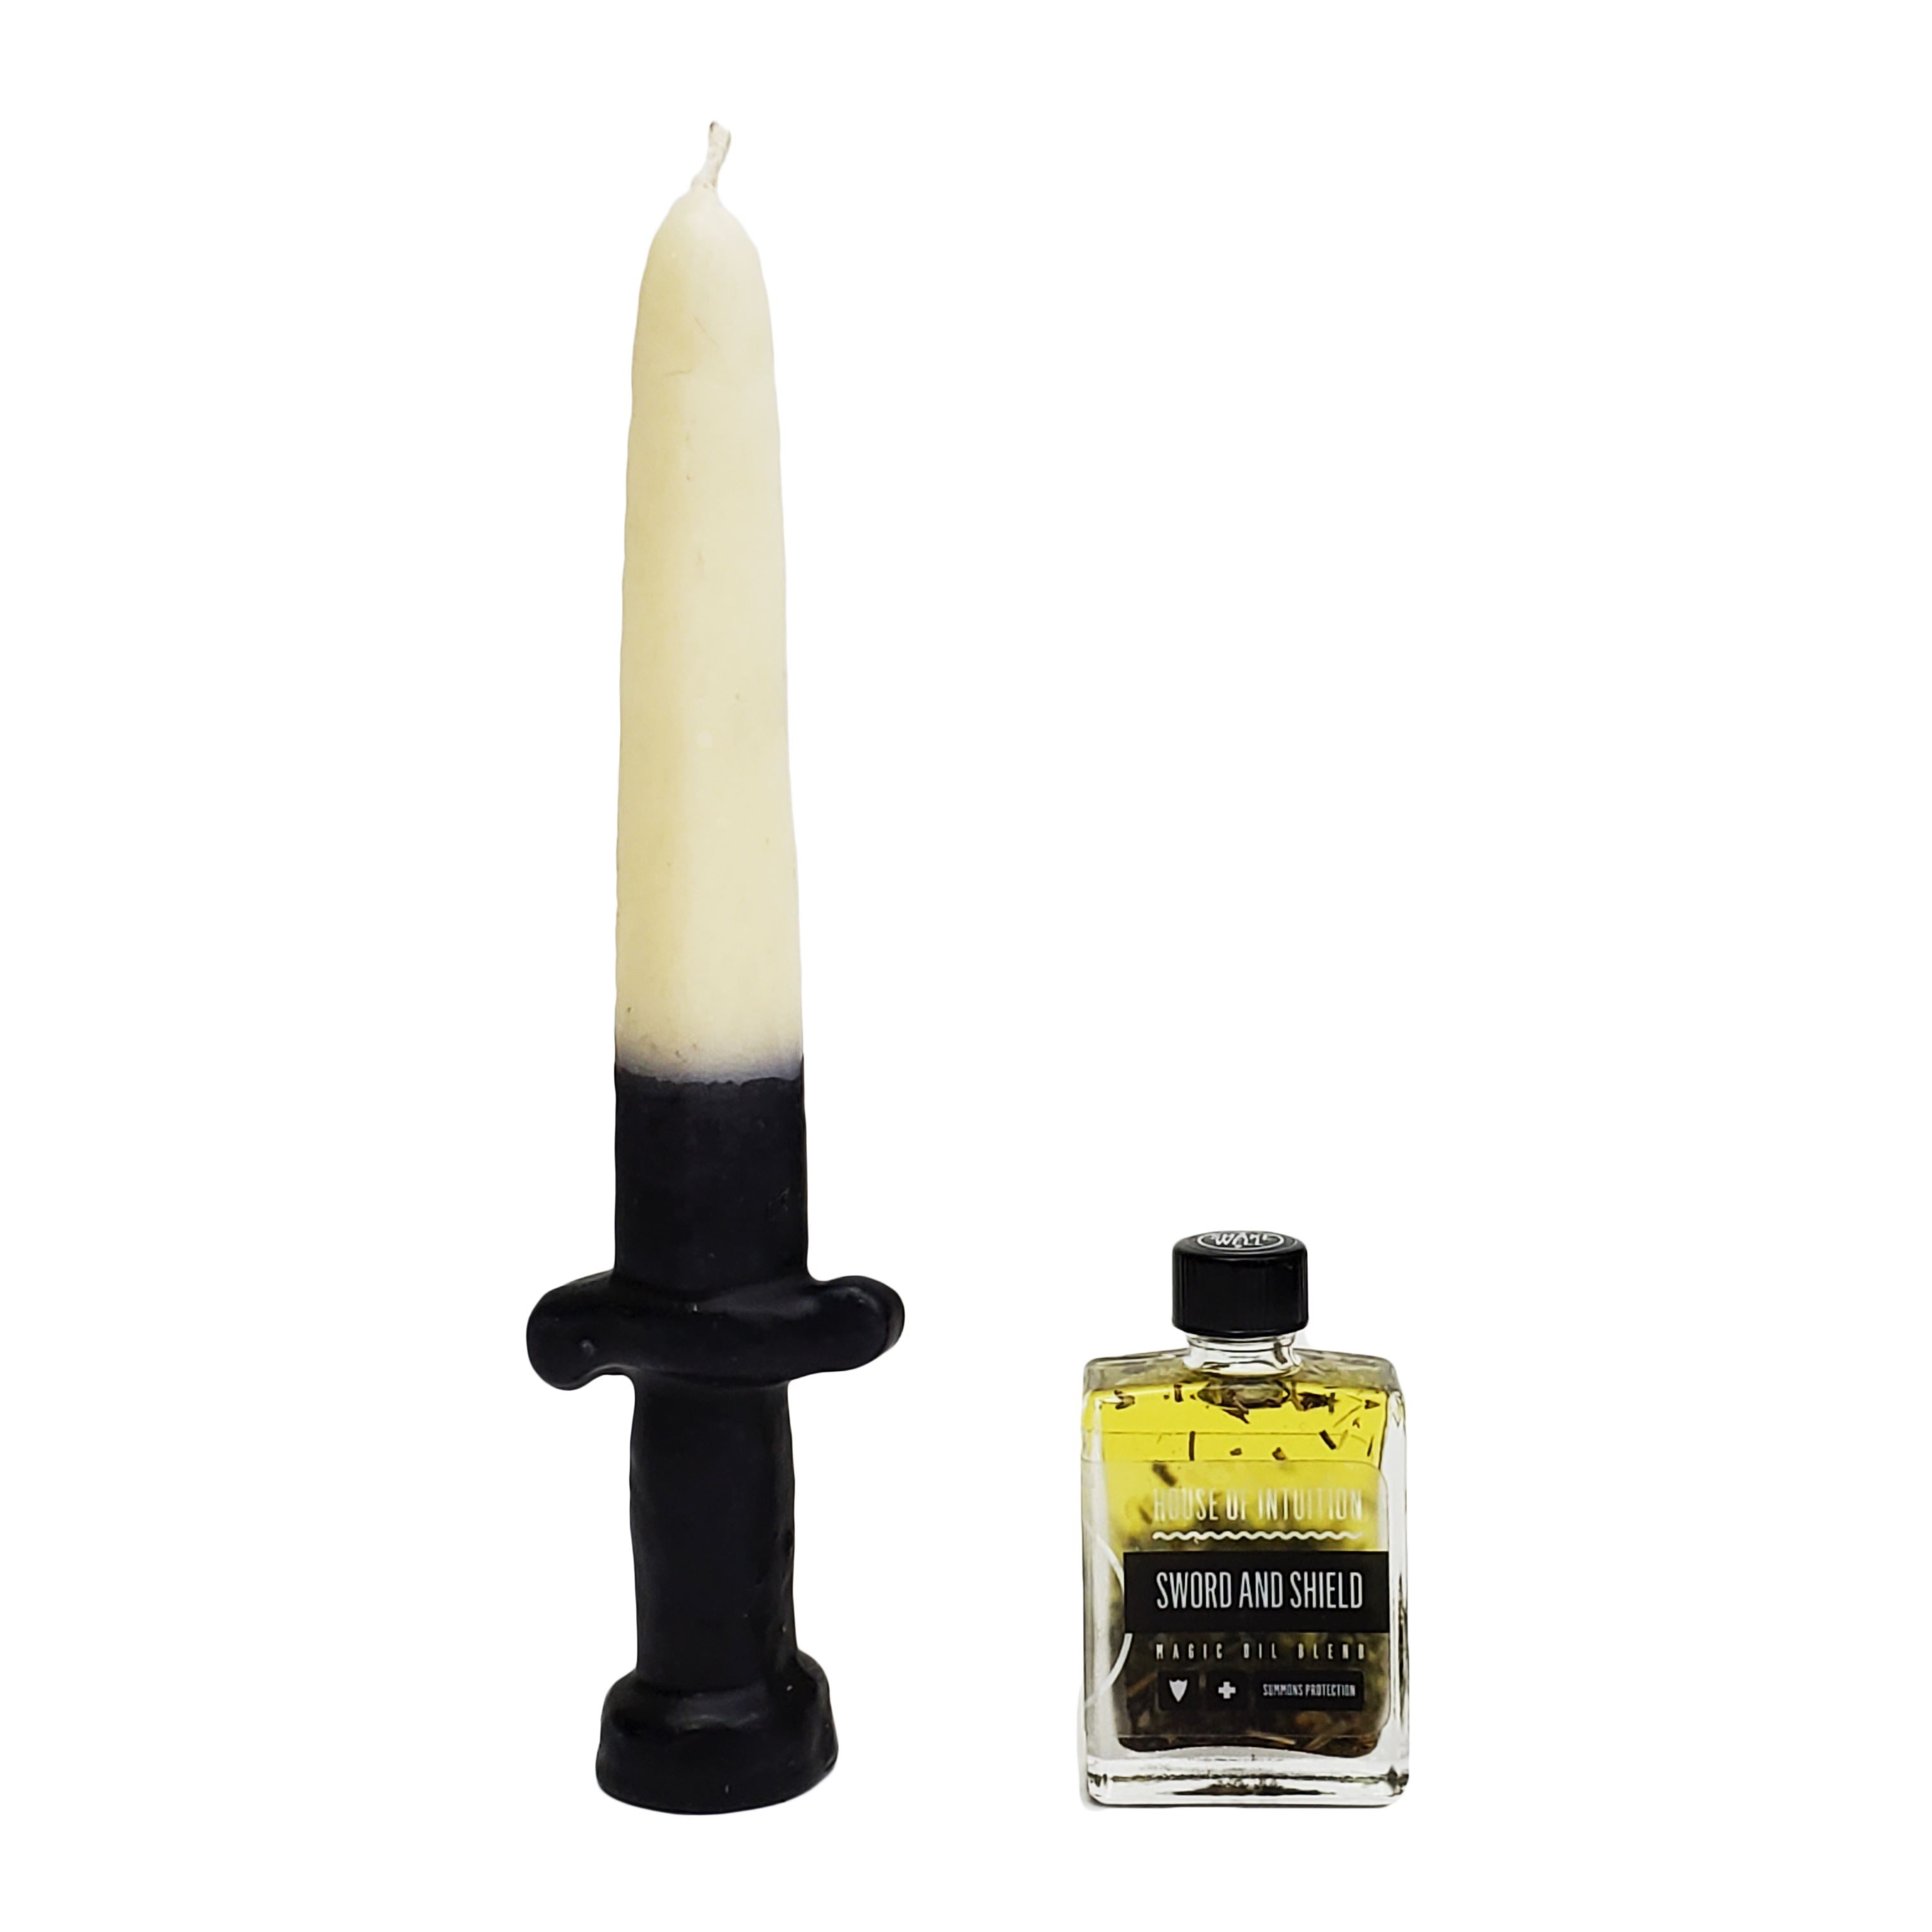 Be Open Symbol Shape Candle Kit (with Pathway Keys Anointing Oil) – House  of Intuition Inc